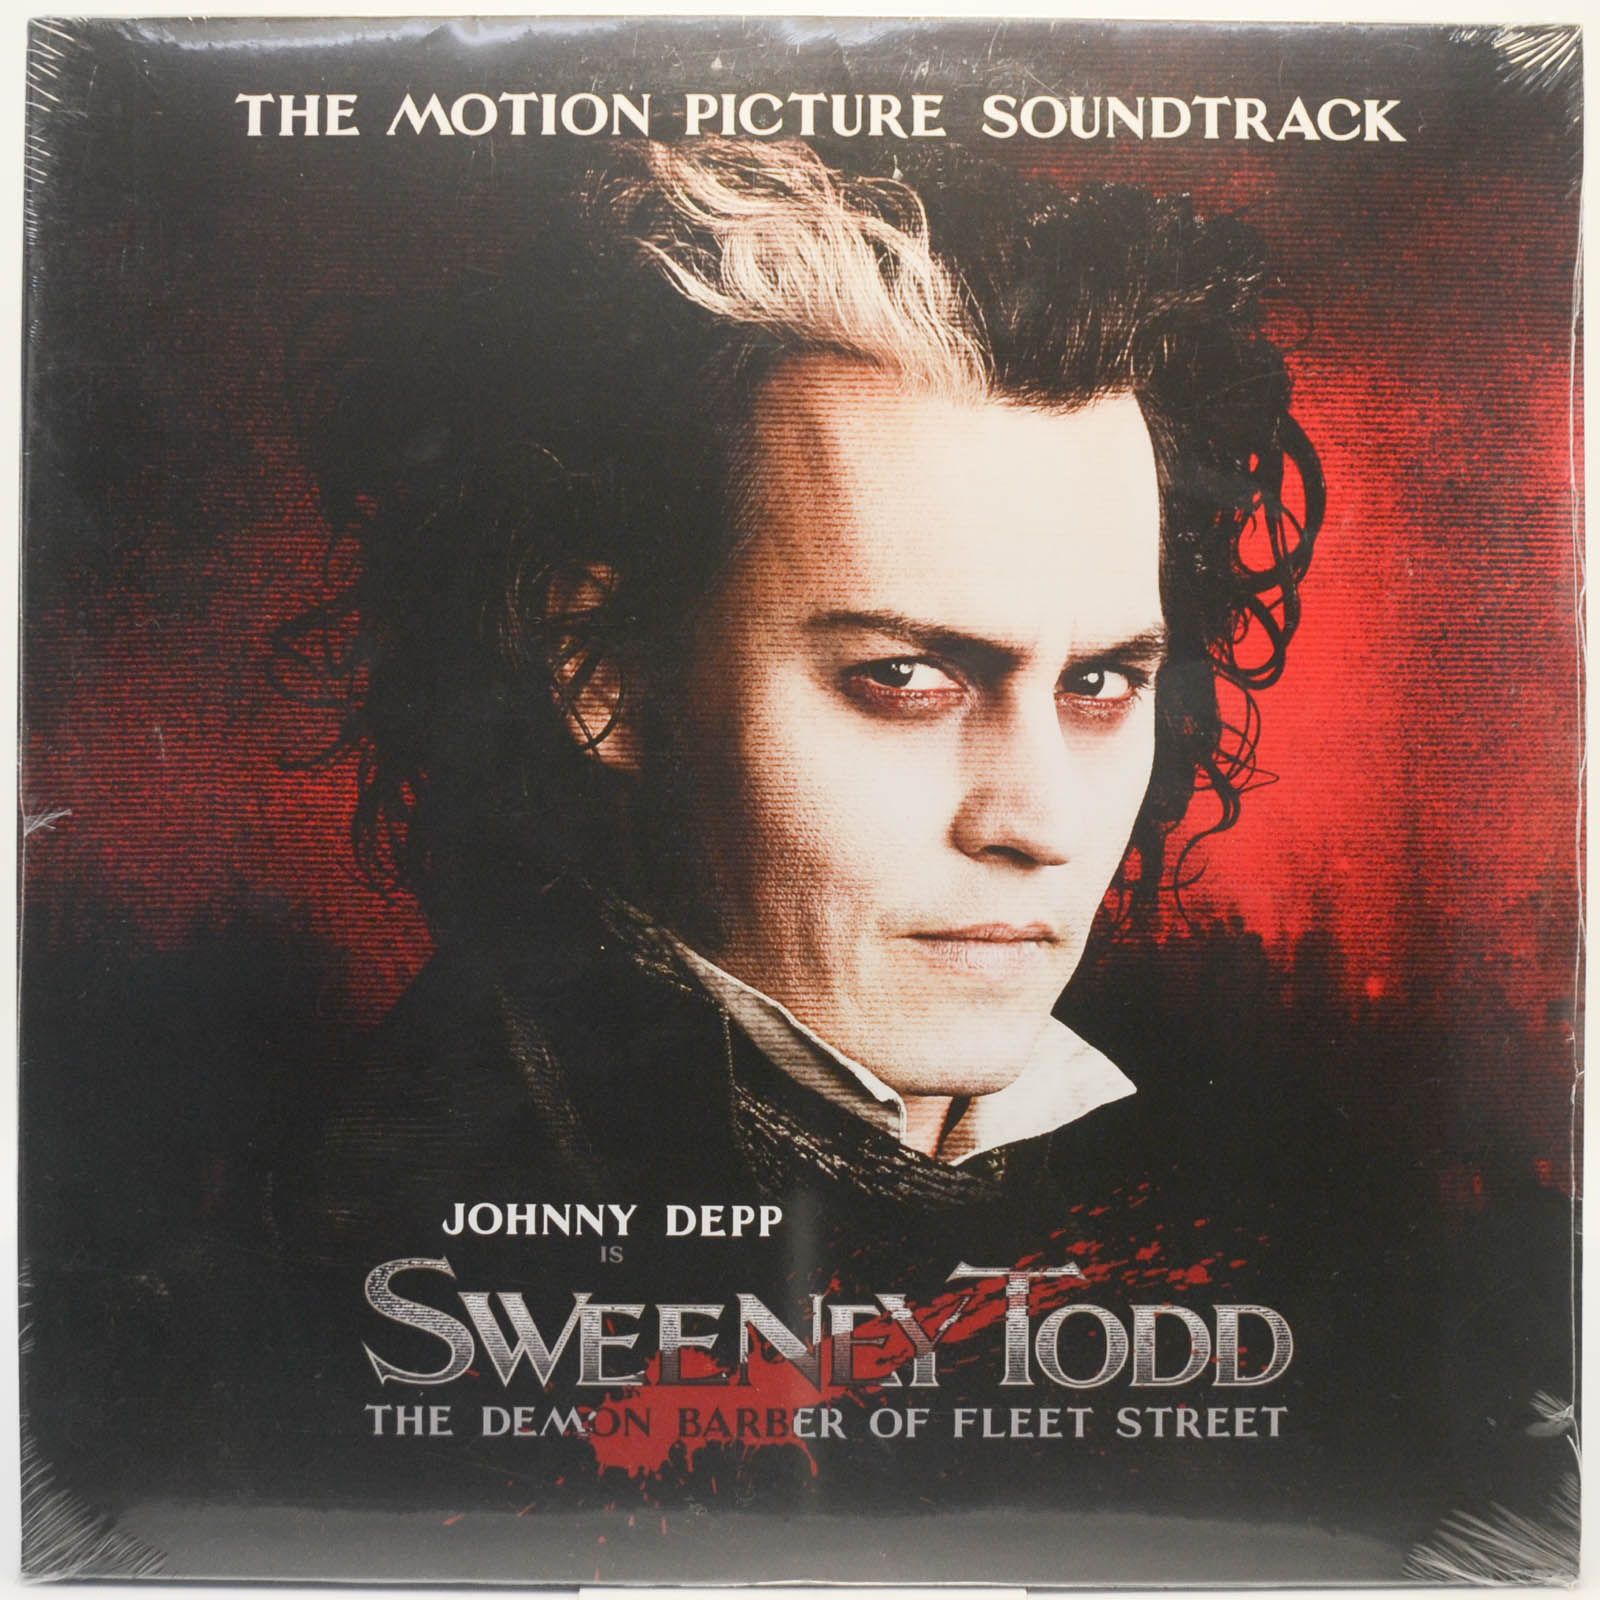 Various — Sweeney Todd: The Demon Barber Of Fleet Street (The Motion Picture Soundtrack) (2LP), 2007